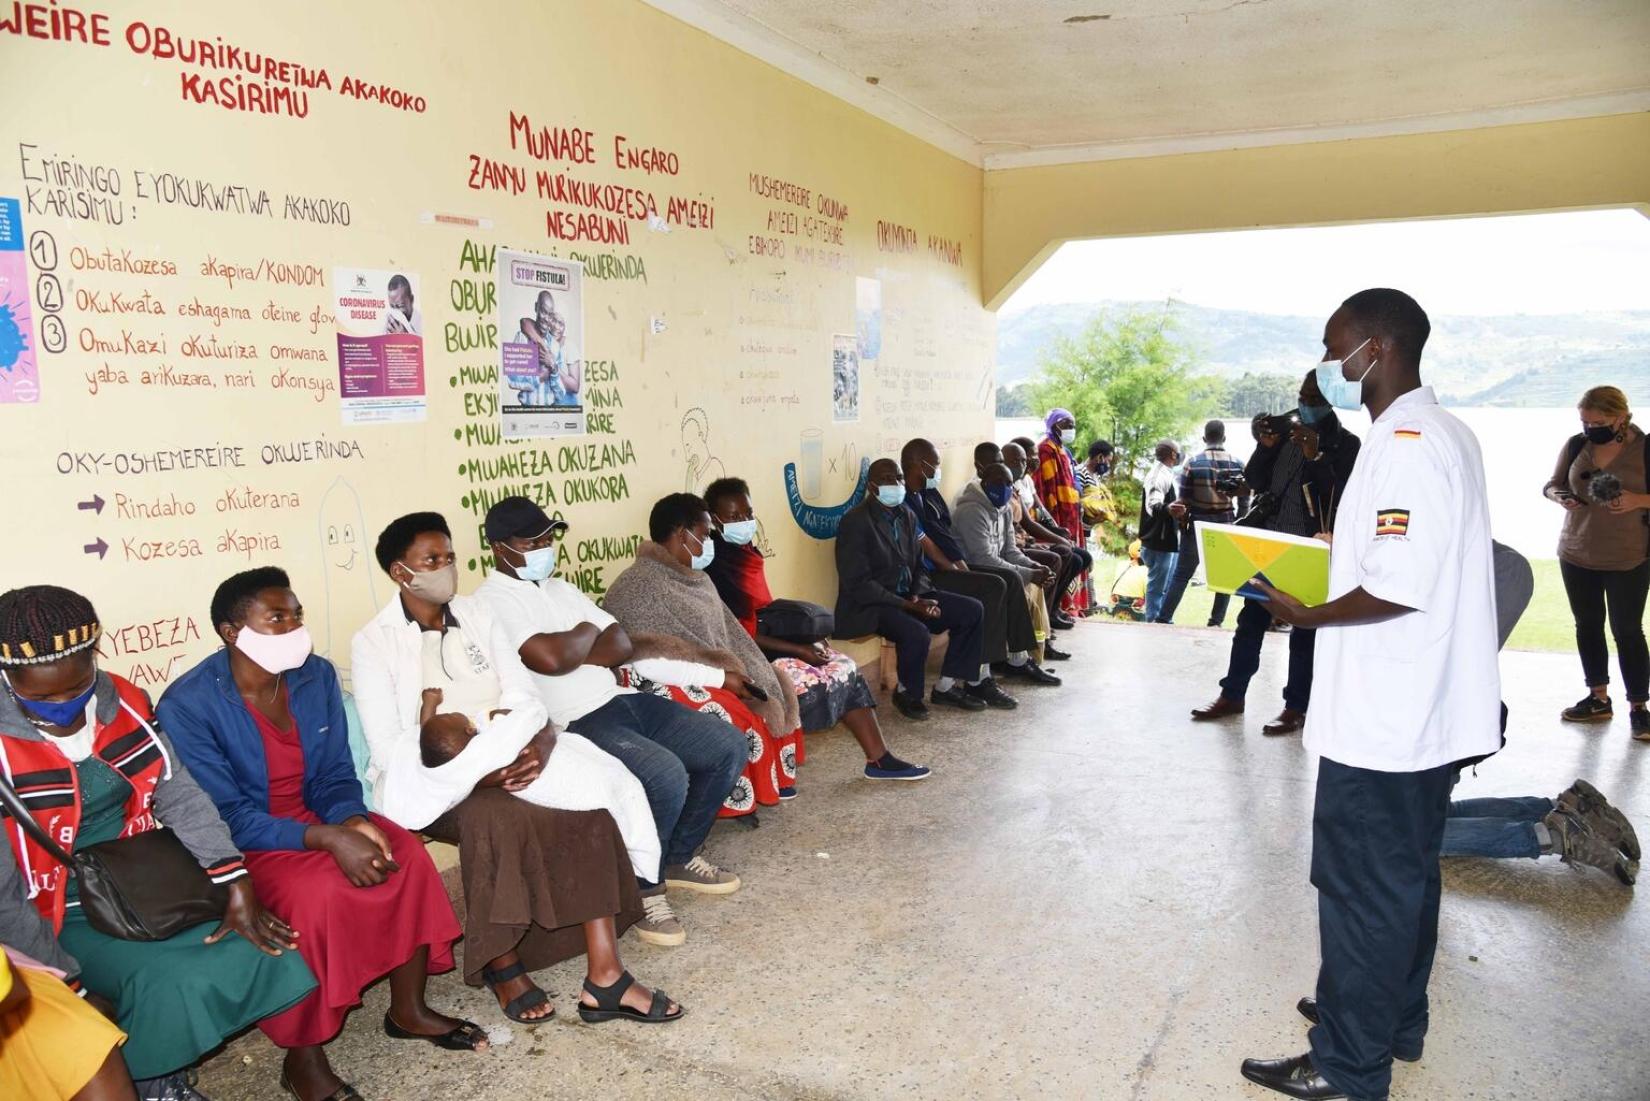 A doctor addressing patients at Butanda Health Centre